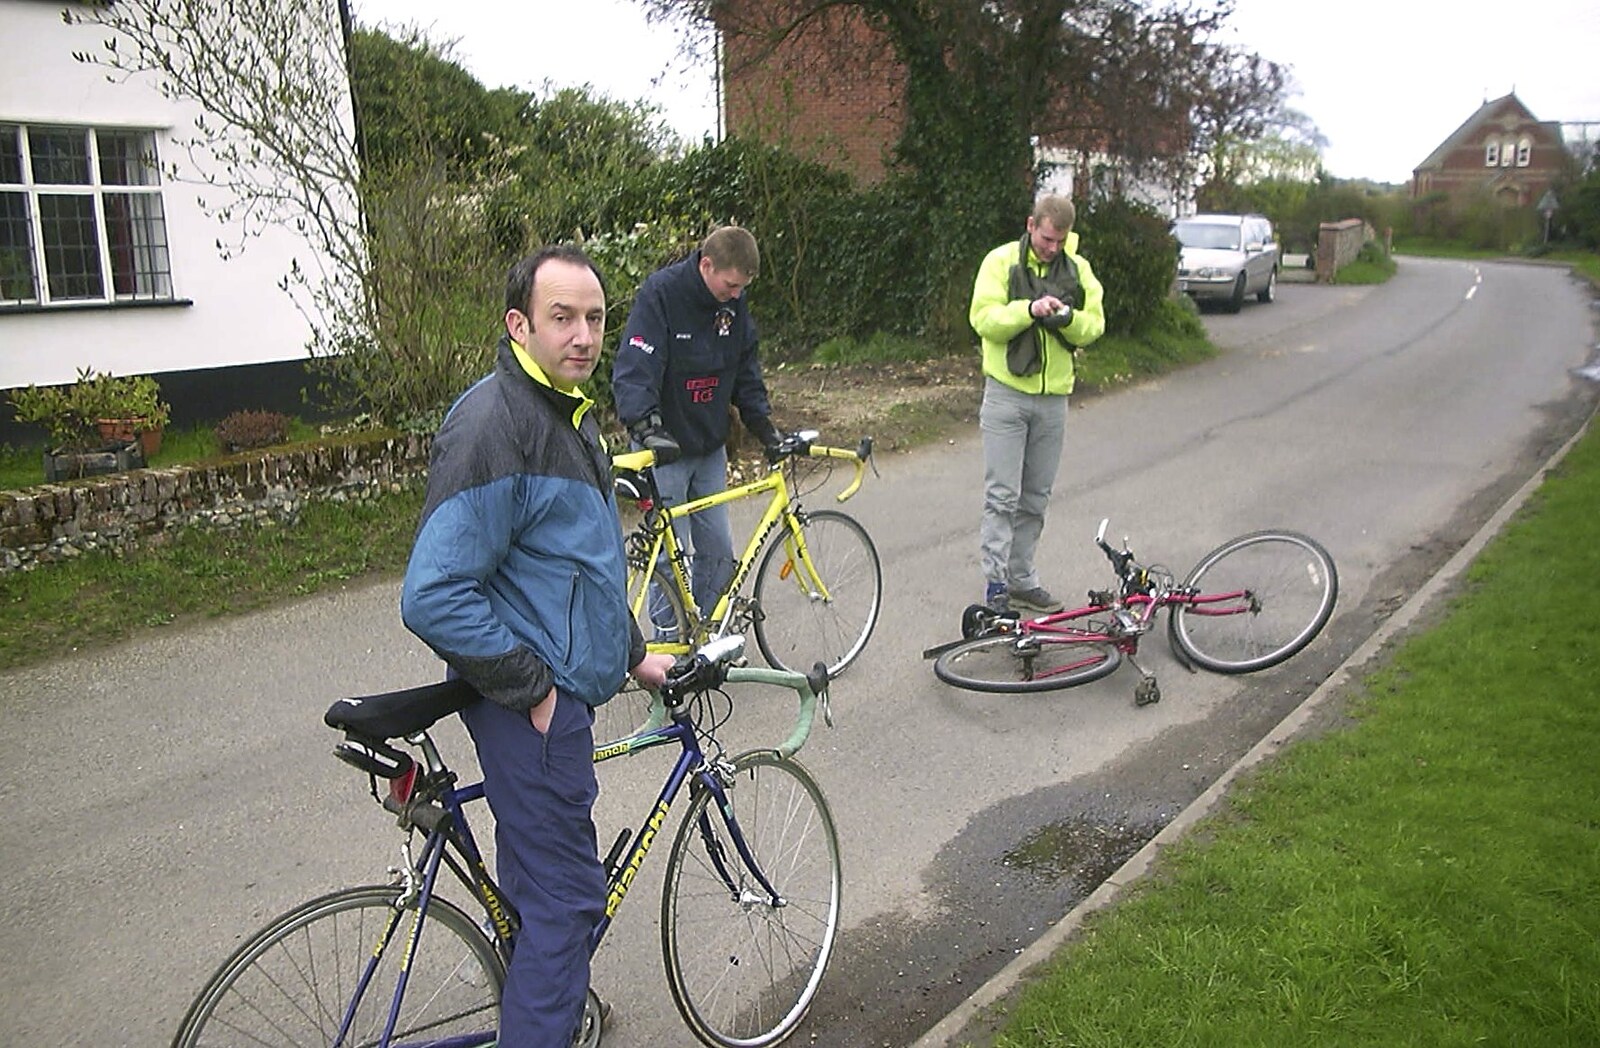 The BSCC Easter Bike Ride, Thelnetham and Redgrave, Suffolk - 10th April 2004: Bill's off his bike again, as DH looks back